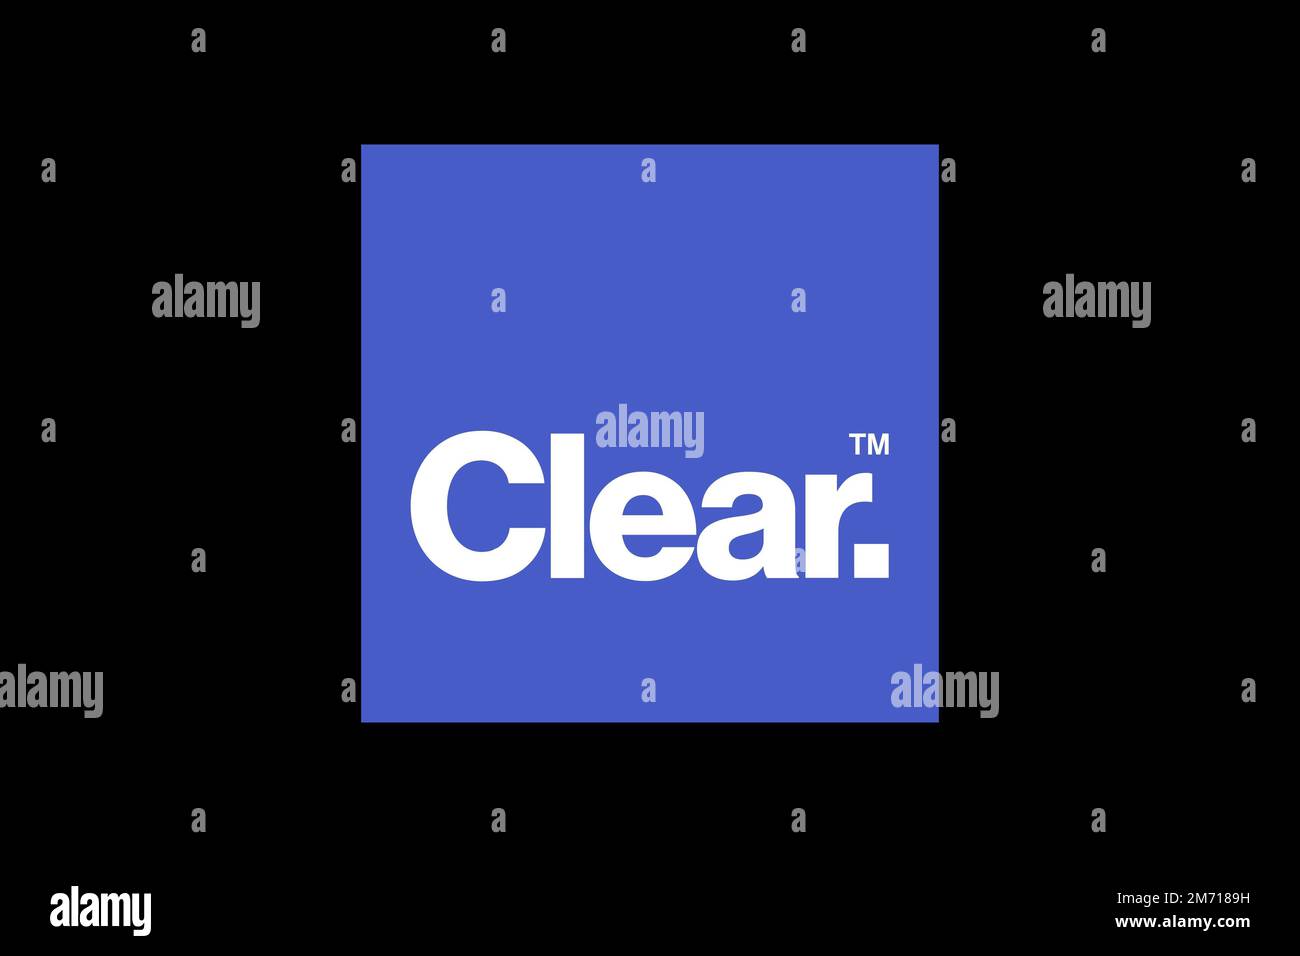 Xclear Networks